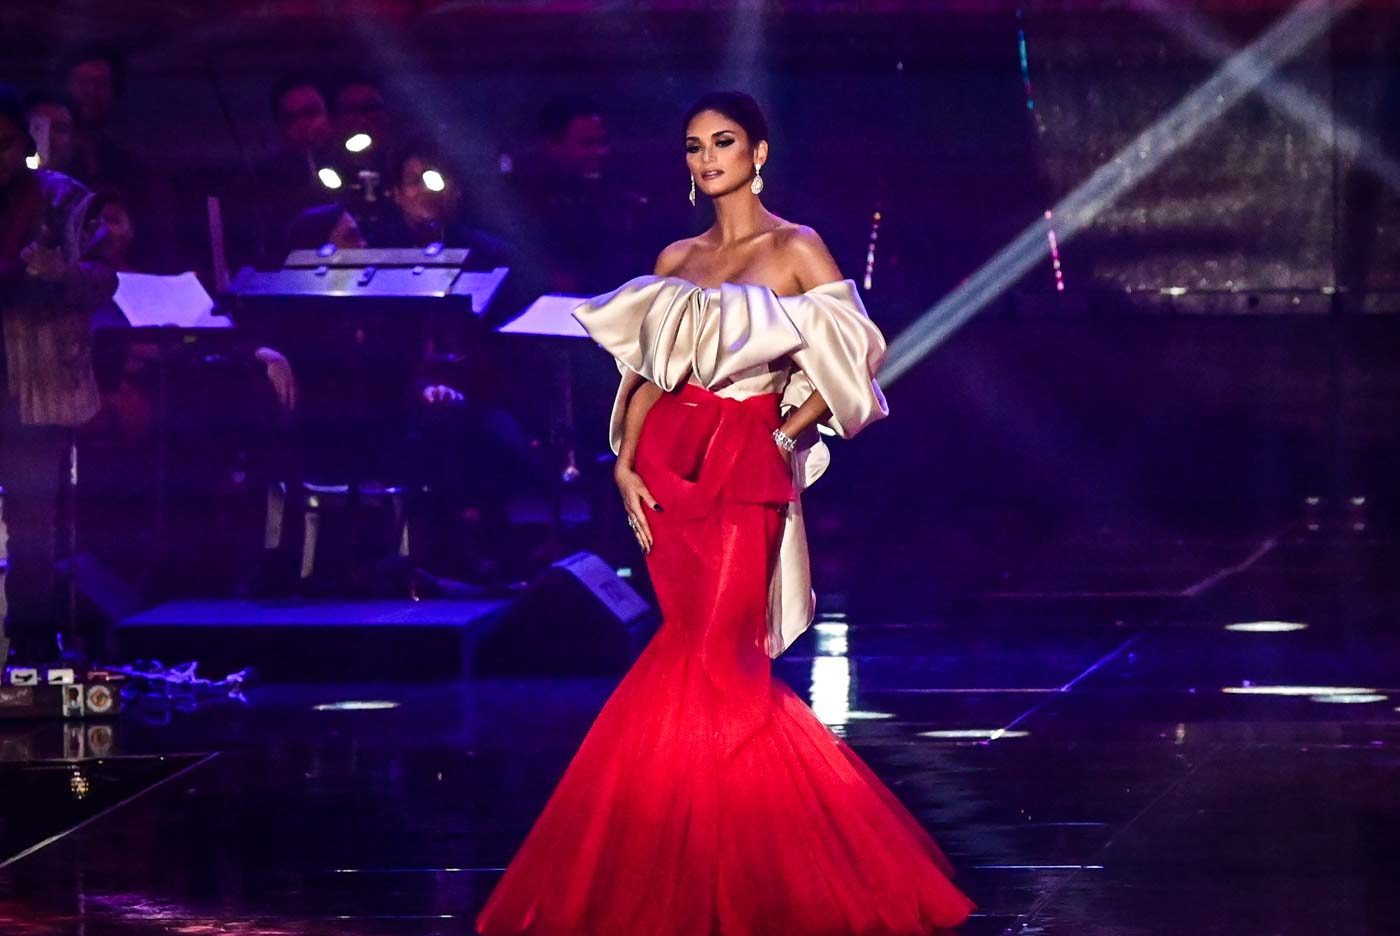 4 years later, Pia Wurtzbach recalls ‘the moment that changed my life forever’